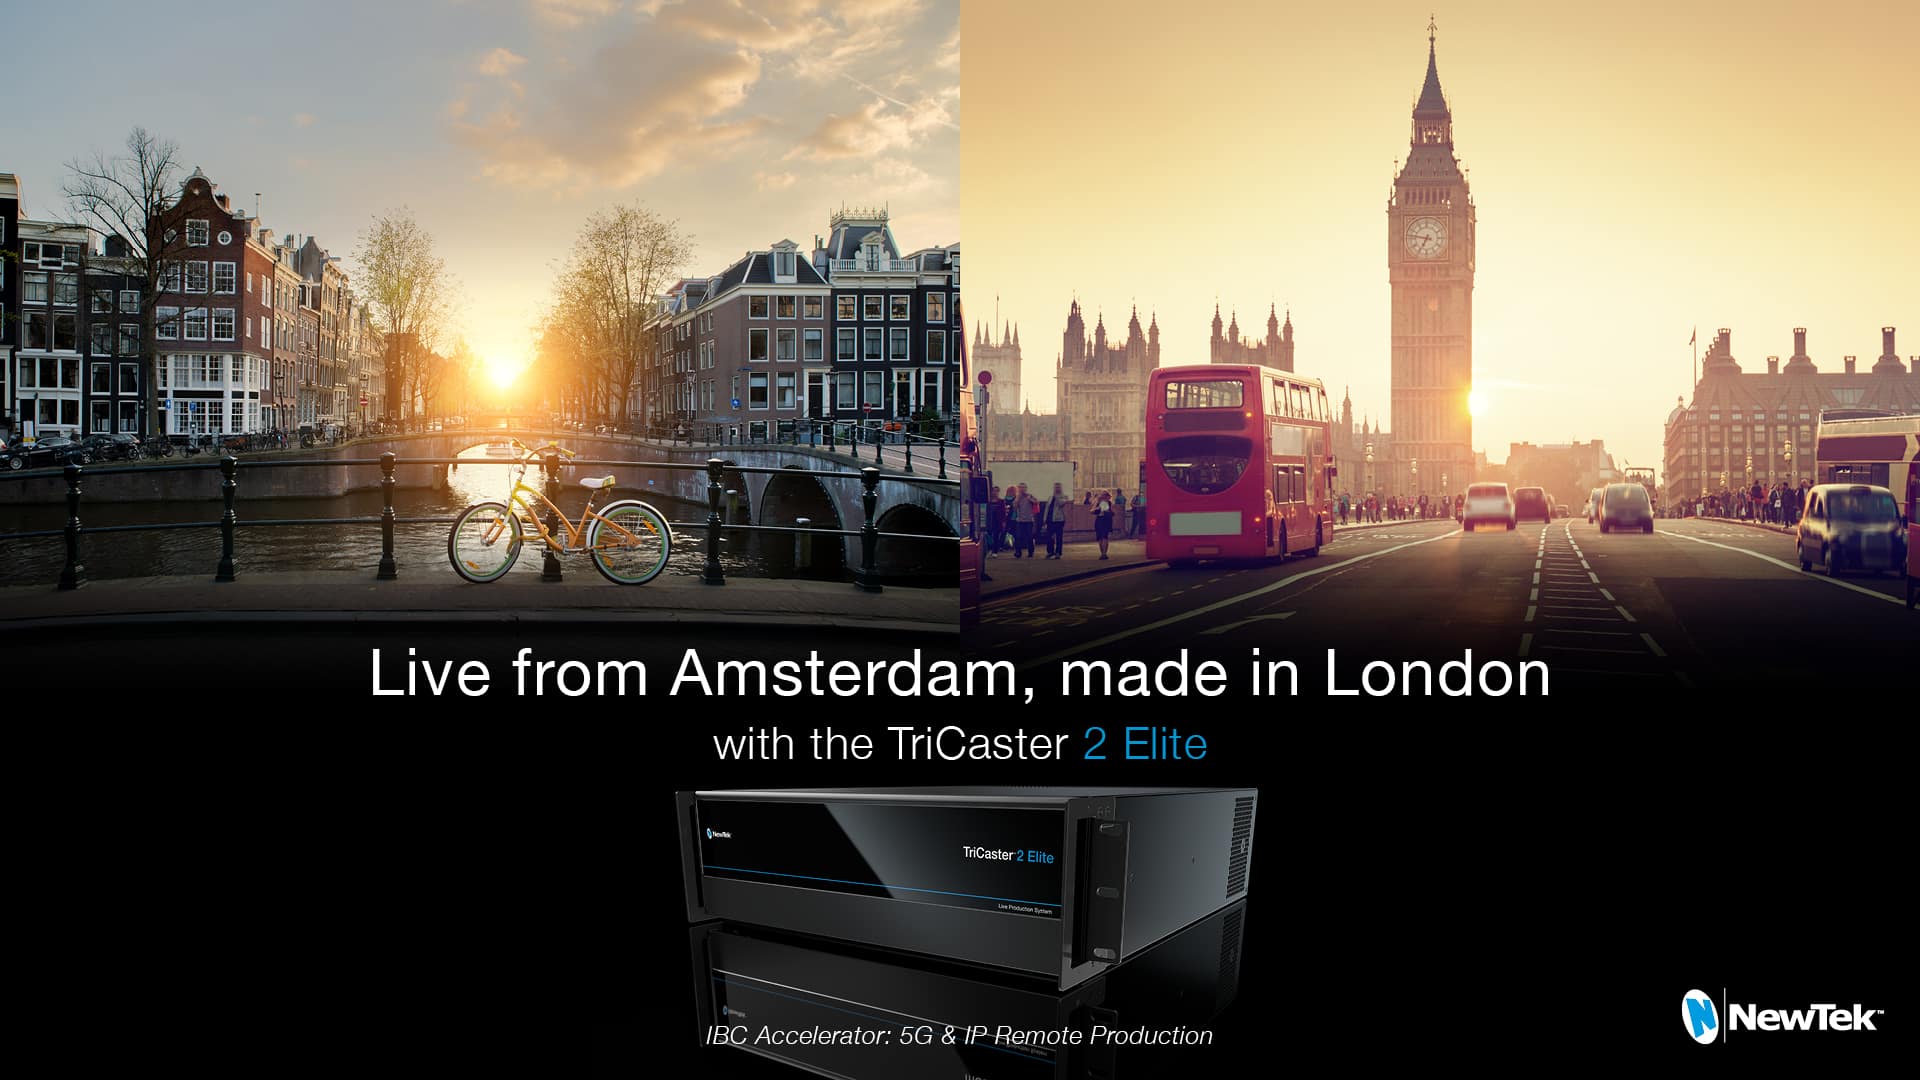 Live from Amsterdam, made in London with the TriCaster 2 Elite.